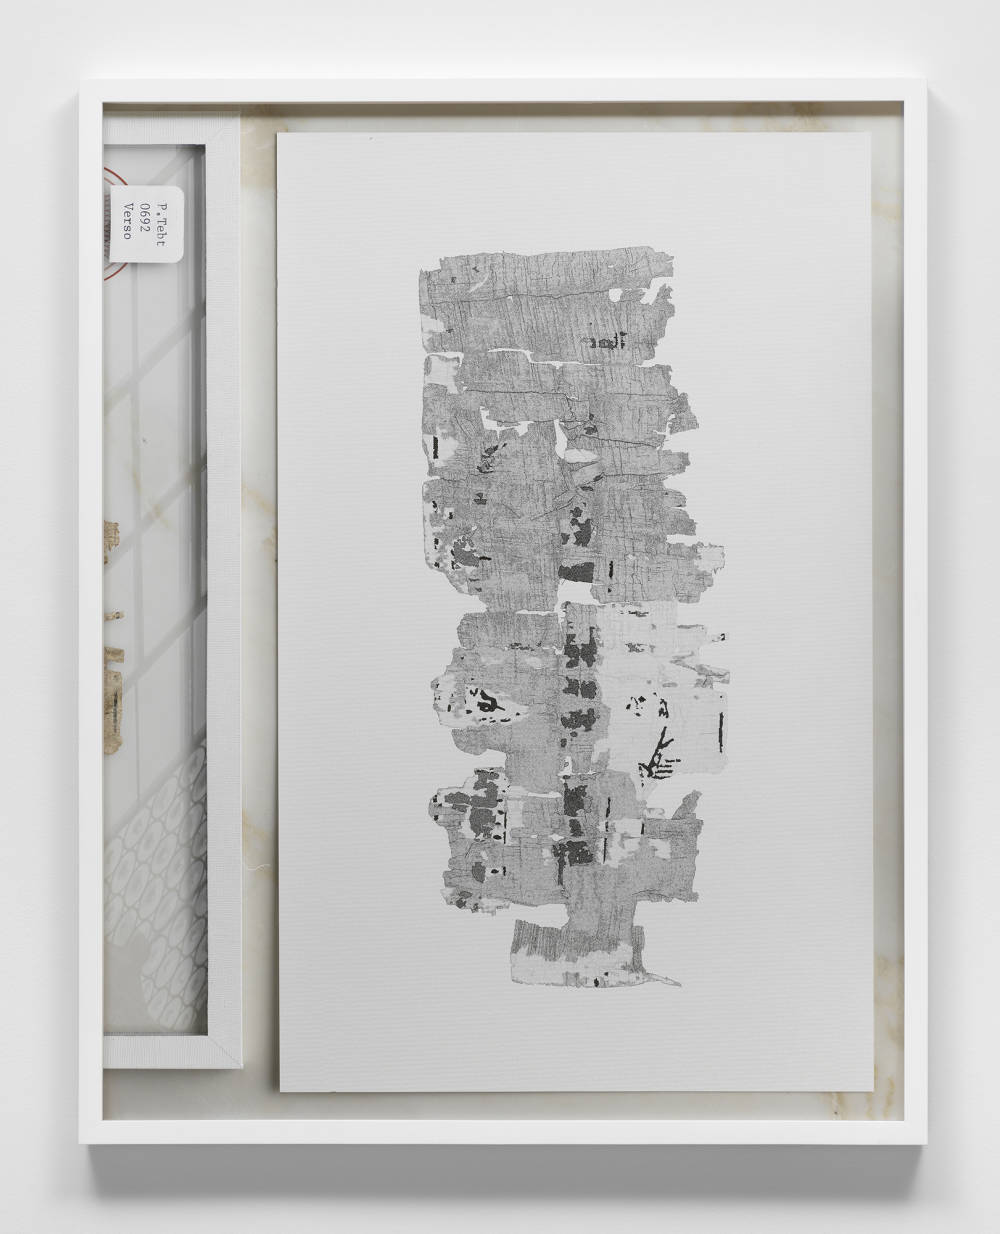 Image of a framed print by Jeffrey Stuker depicting a digitally rendered scene, shot from above, of a piece of papyrus and a drawing of the same papyrus on the right.